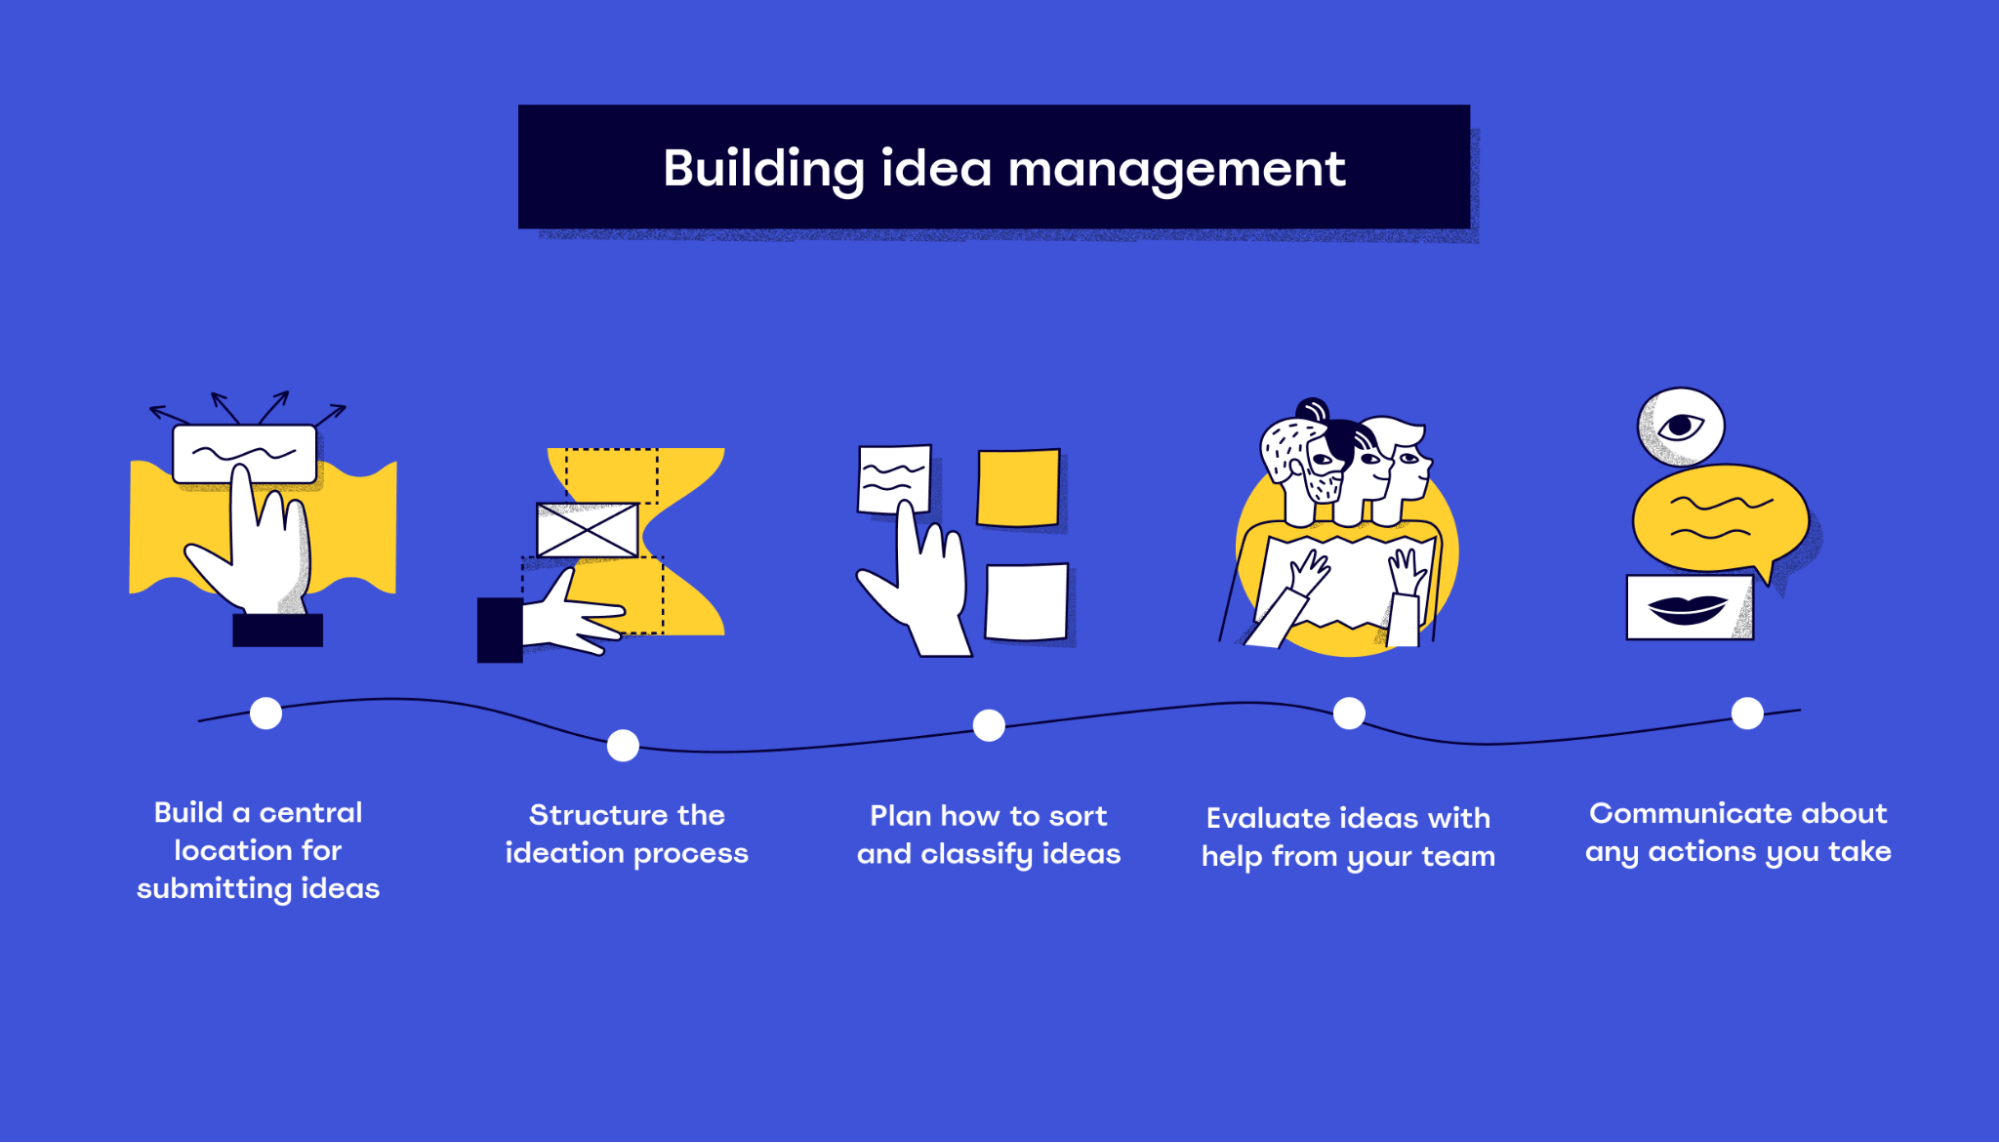 Use these five steps to build an idea management process